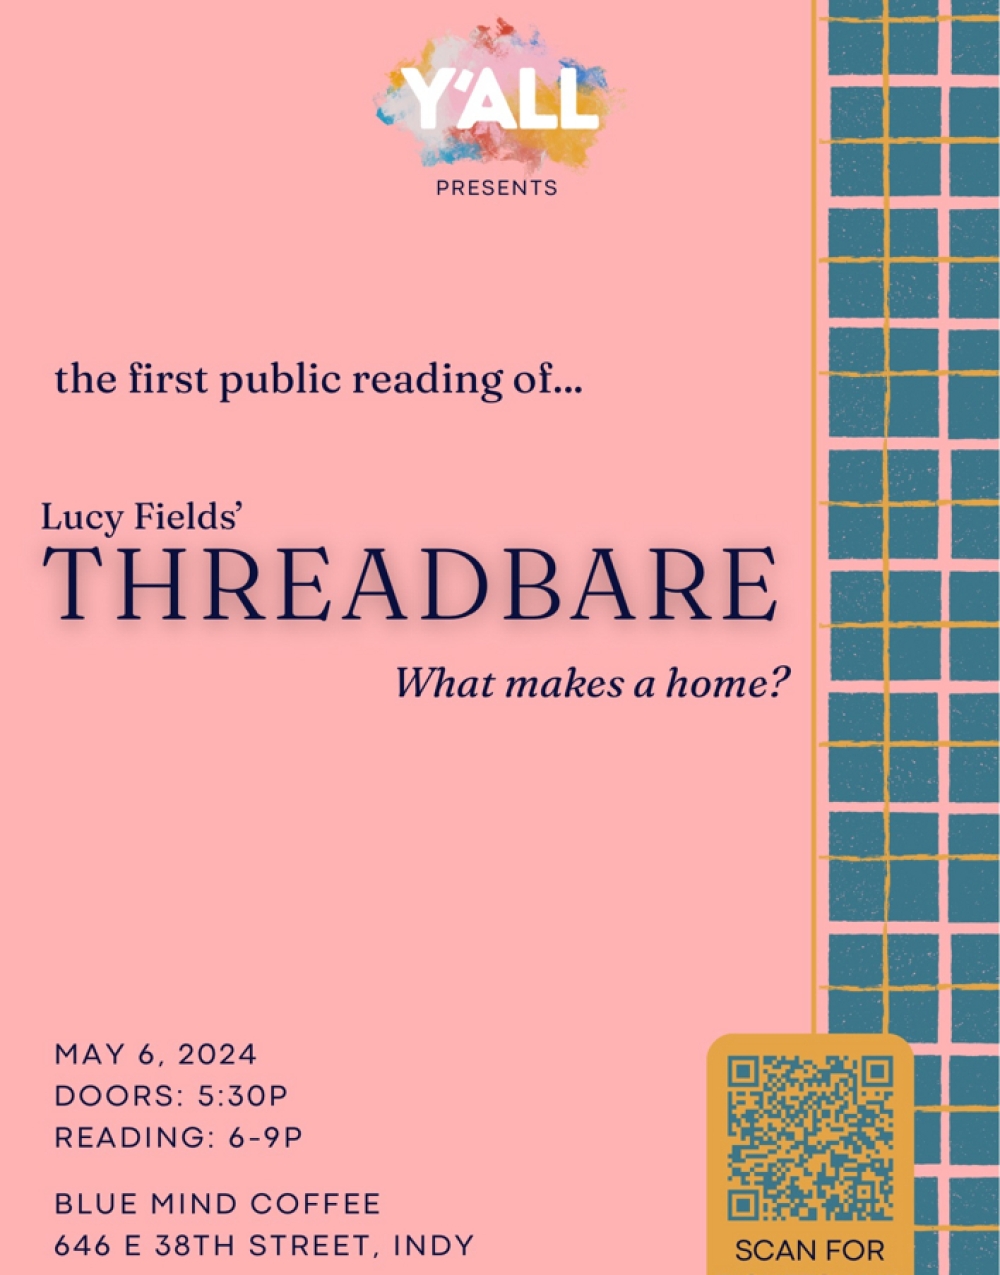 Threadbare at Presented by Y'all